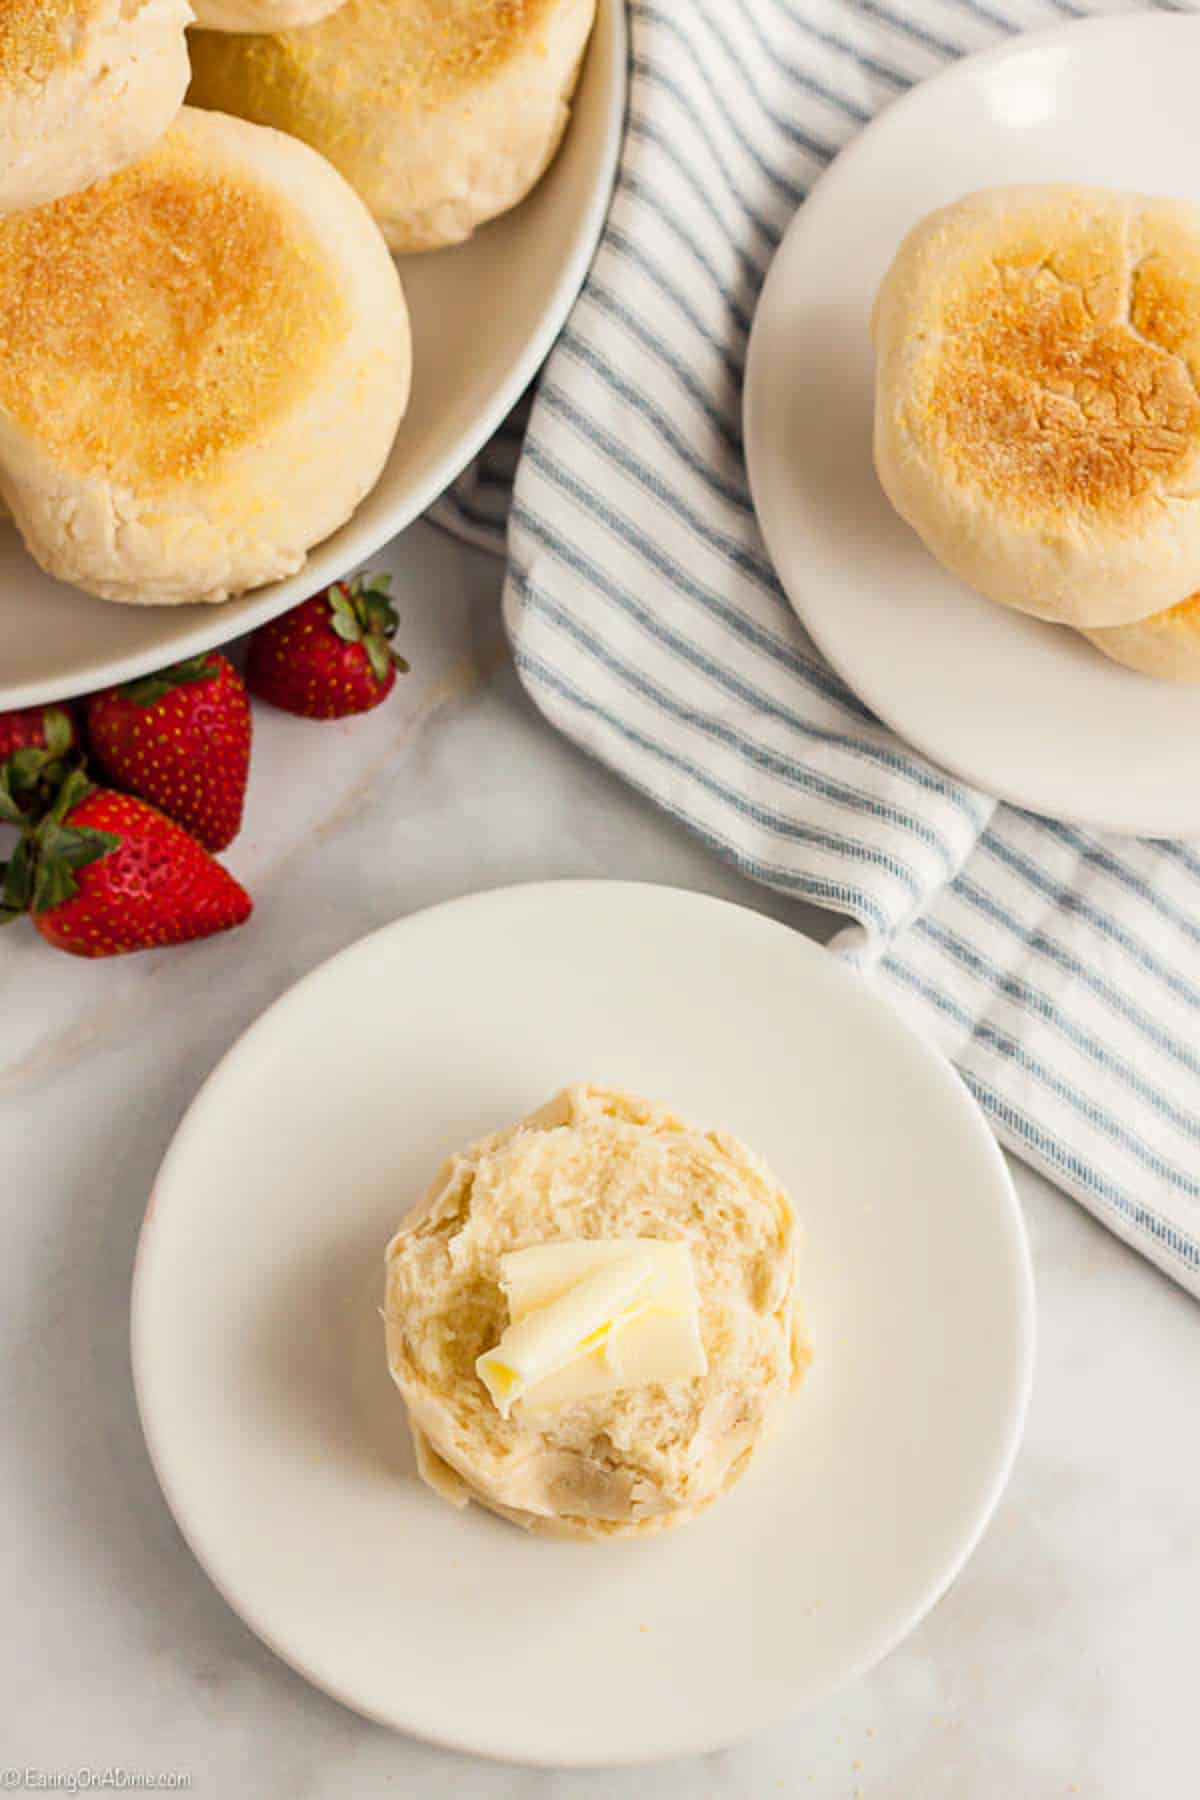 Easy English Muffin Recipe without a Bead Maker - Ever After in the Woods